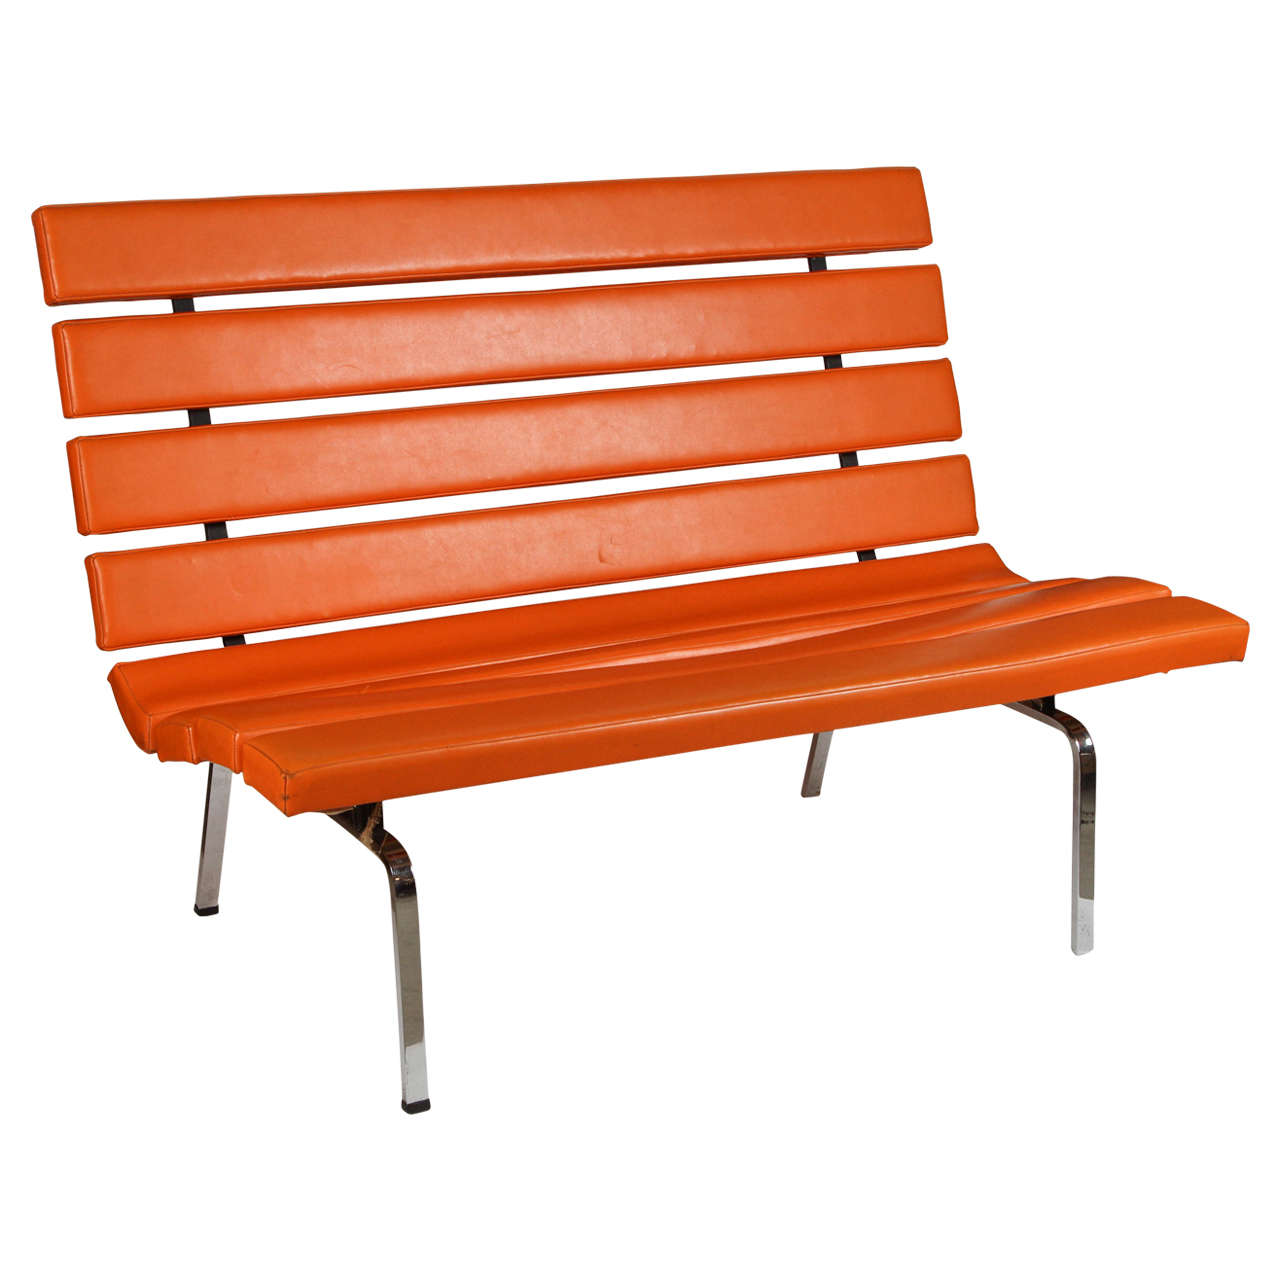 Rare Gerald McCabe for Pacific Steel Slat Bench For Sale